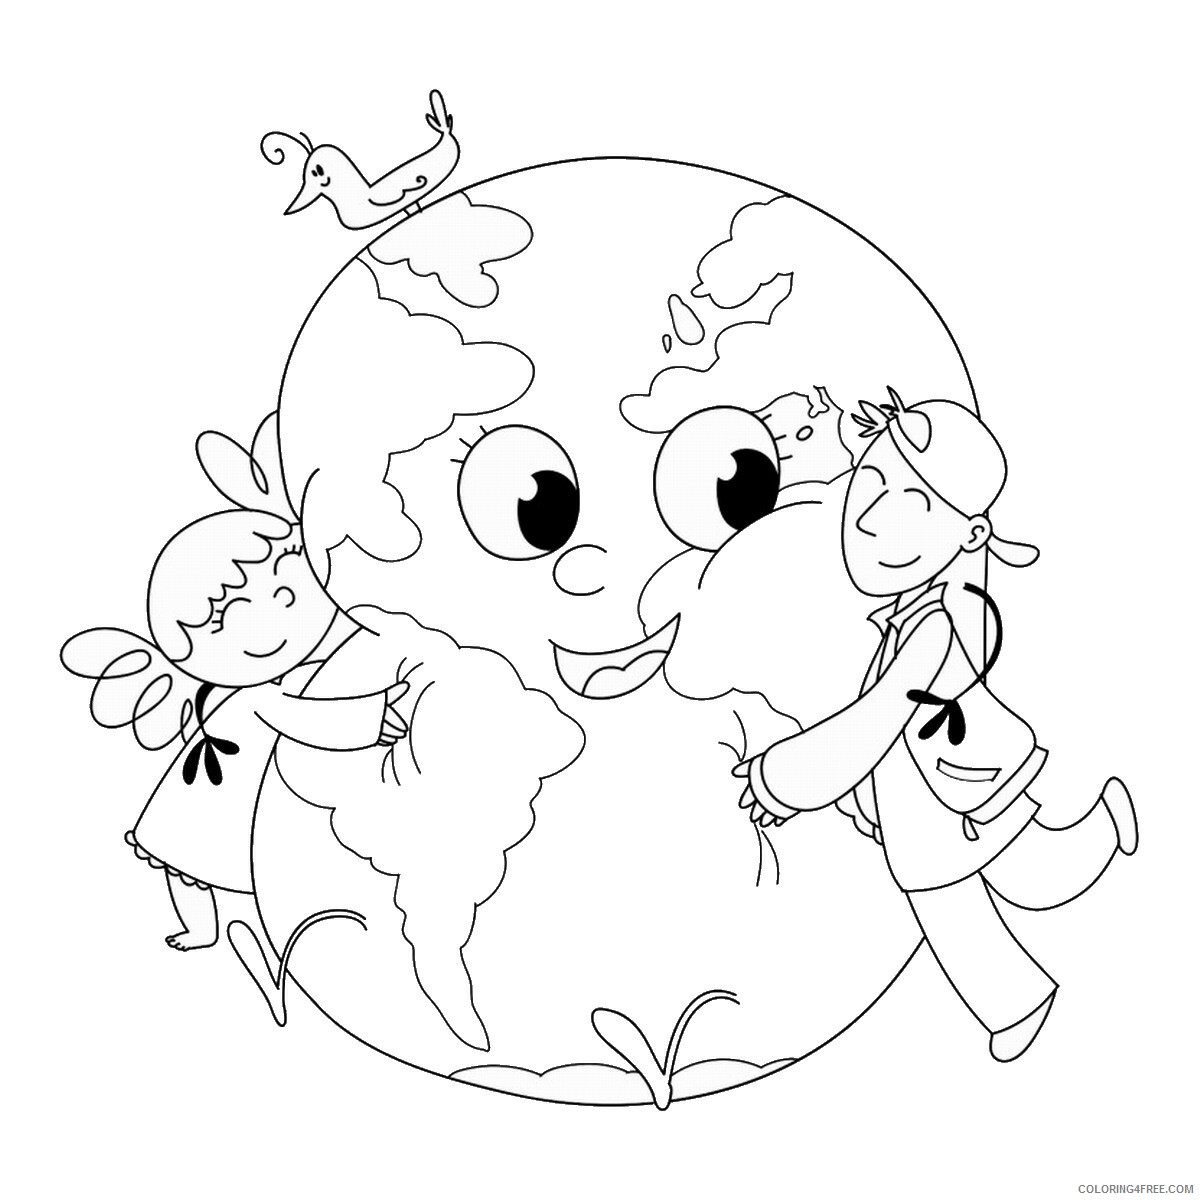 earth-day-coloring-pages-holiday-earth-day-coloring18-printable-2021